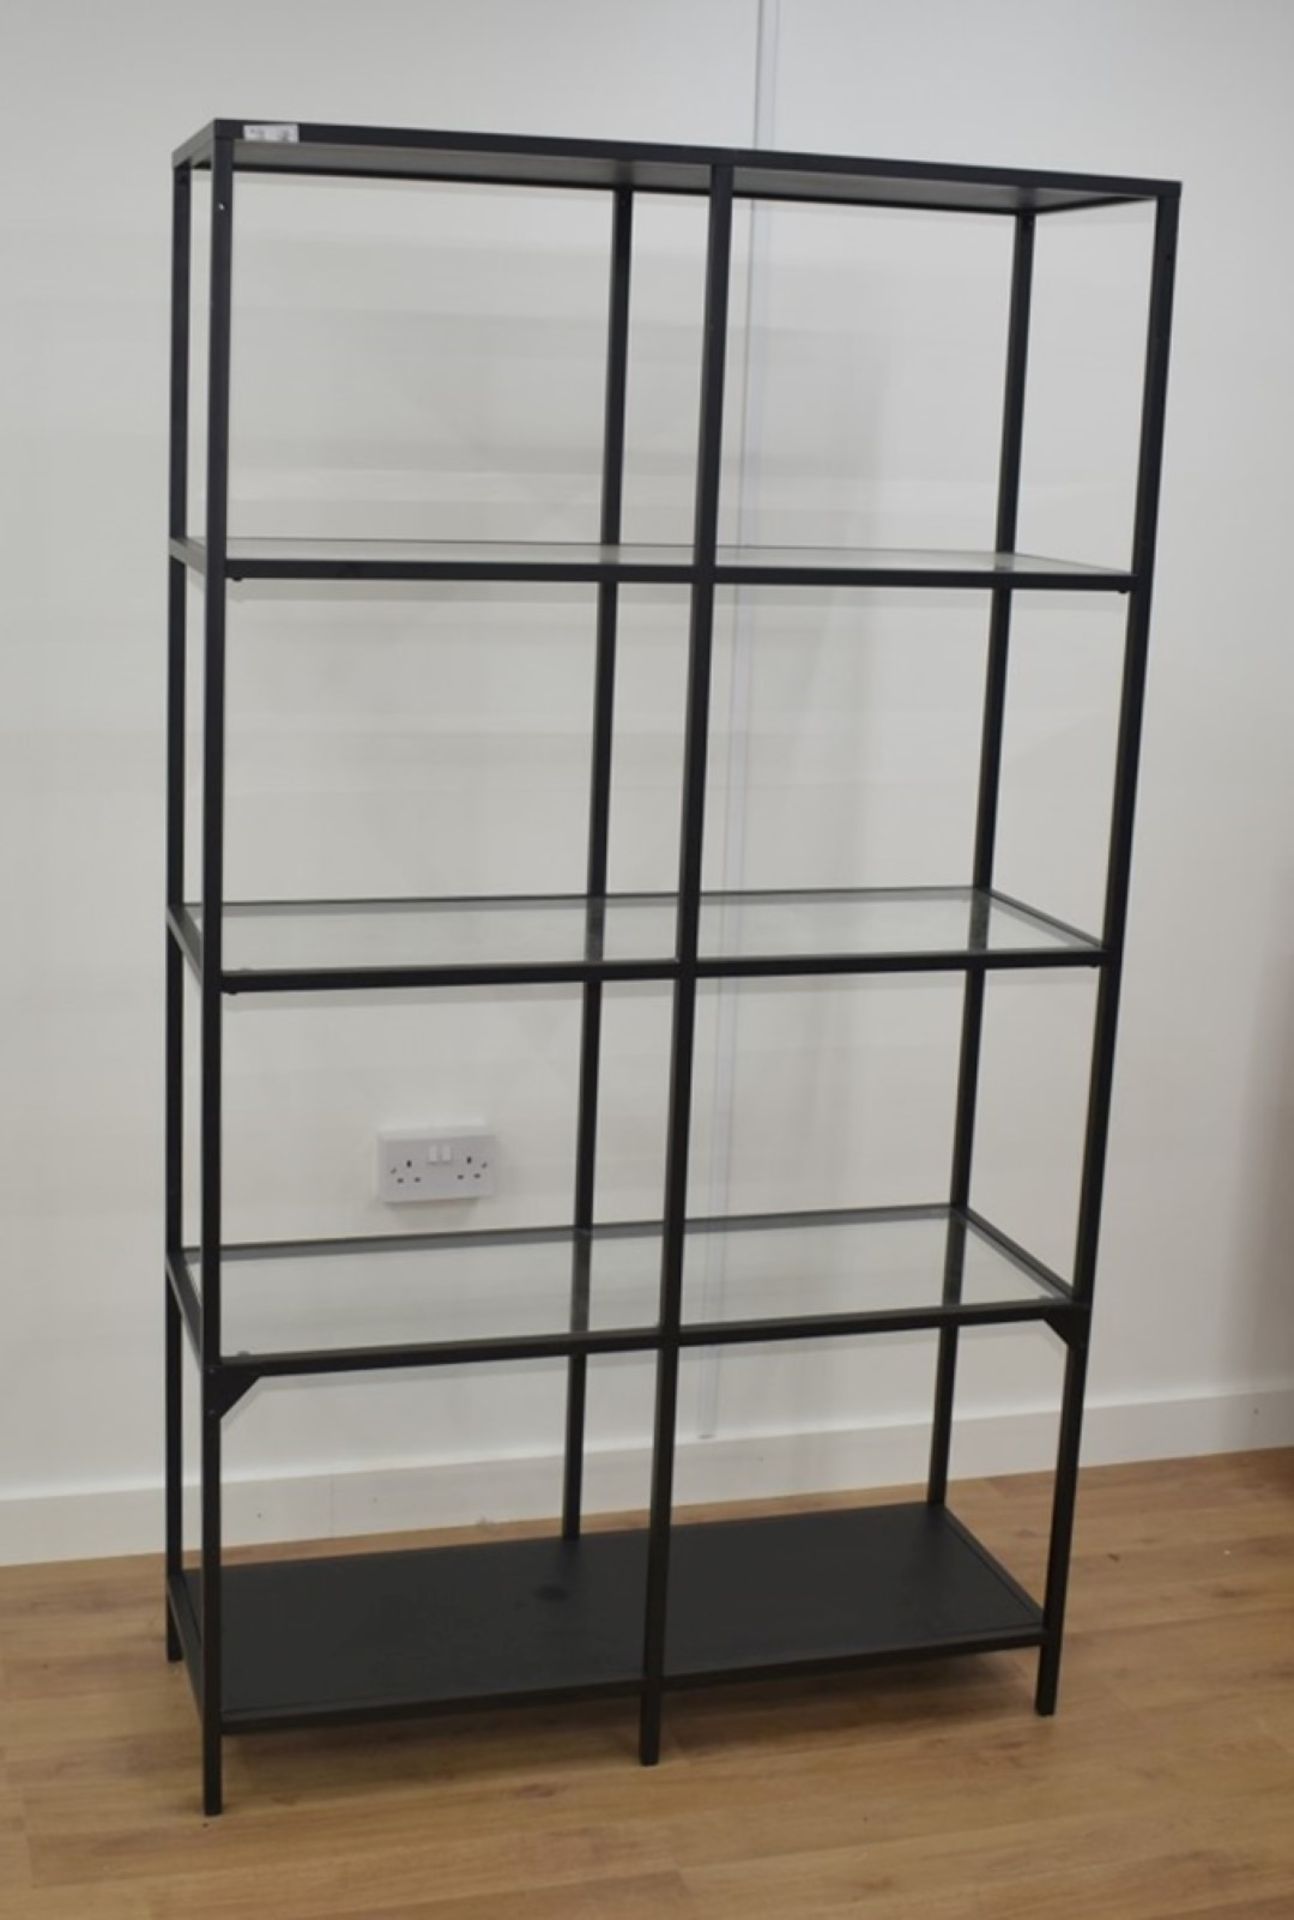 1 x Upright Modern Display Shelving Unit With Metal Frame and Glass Shelves - Image 4 of 5